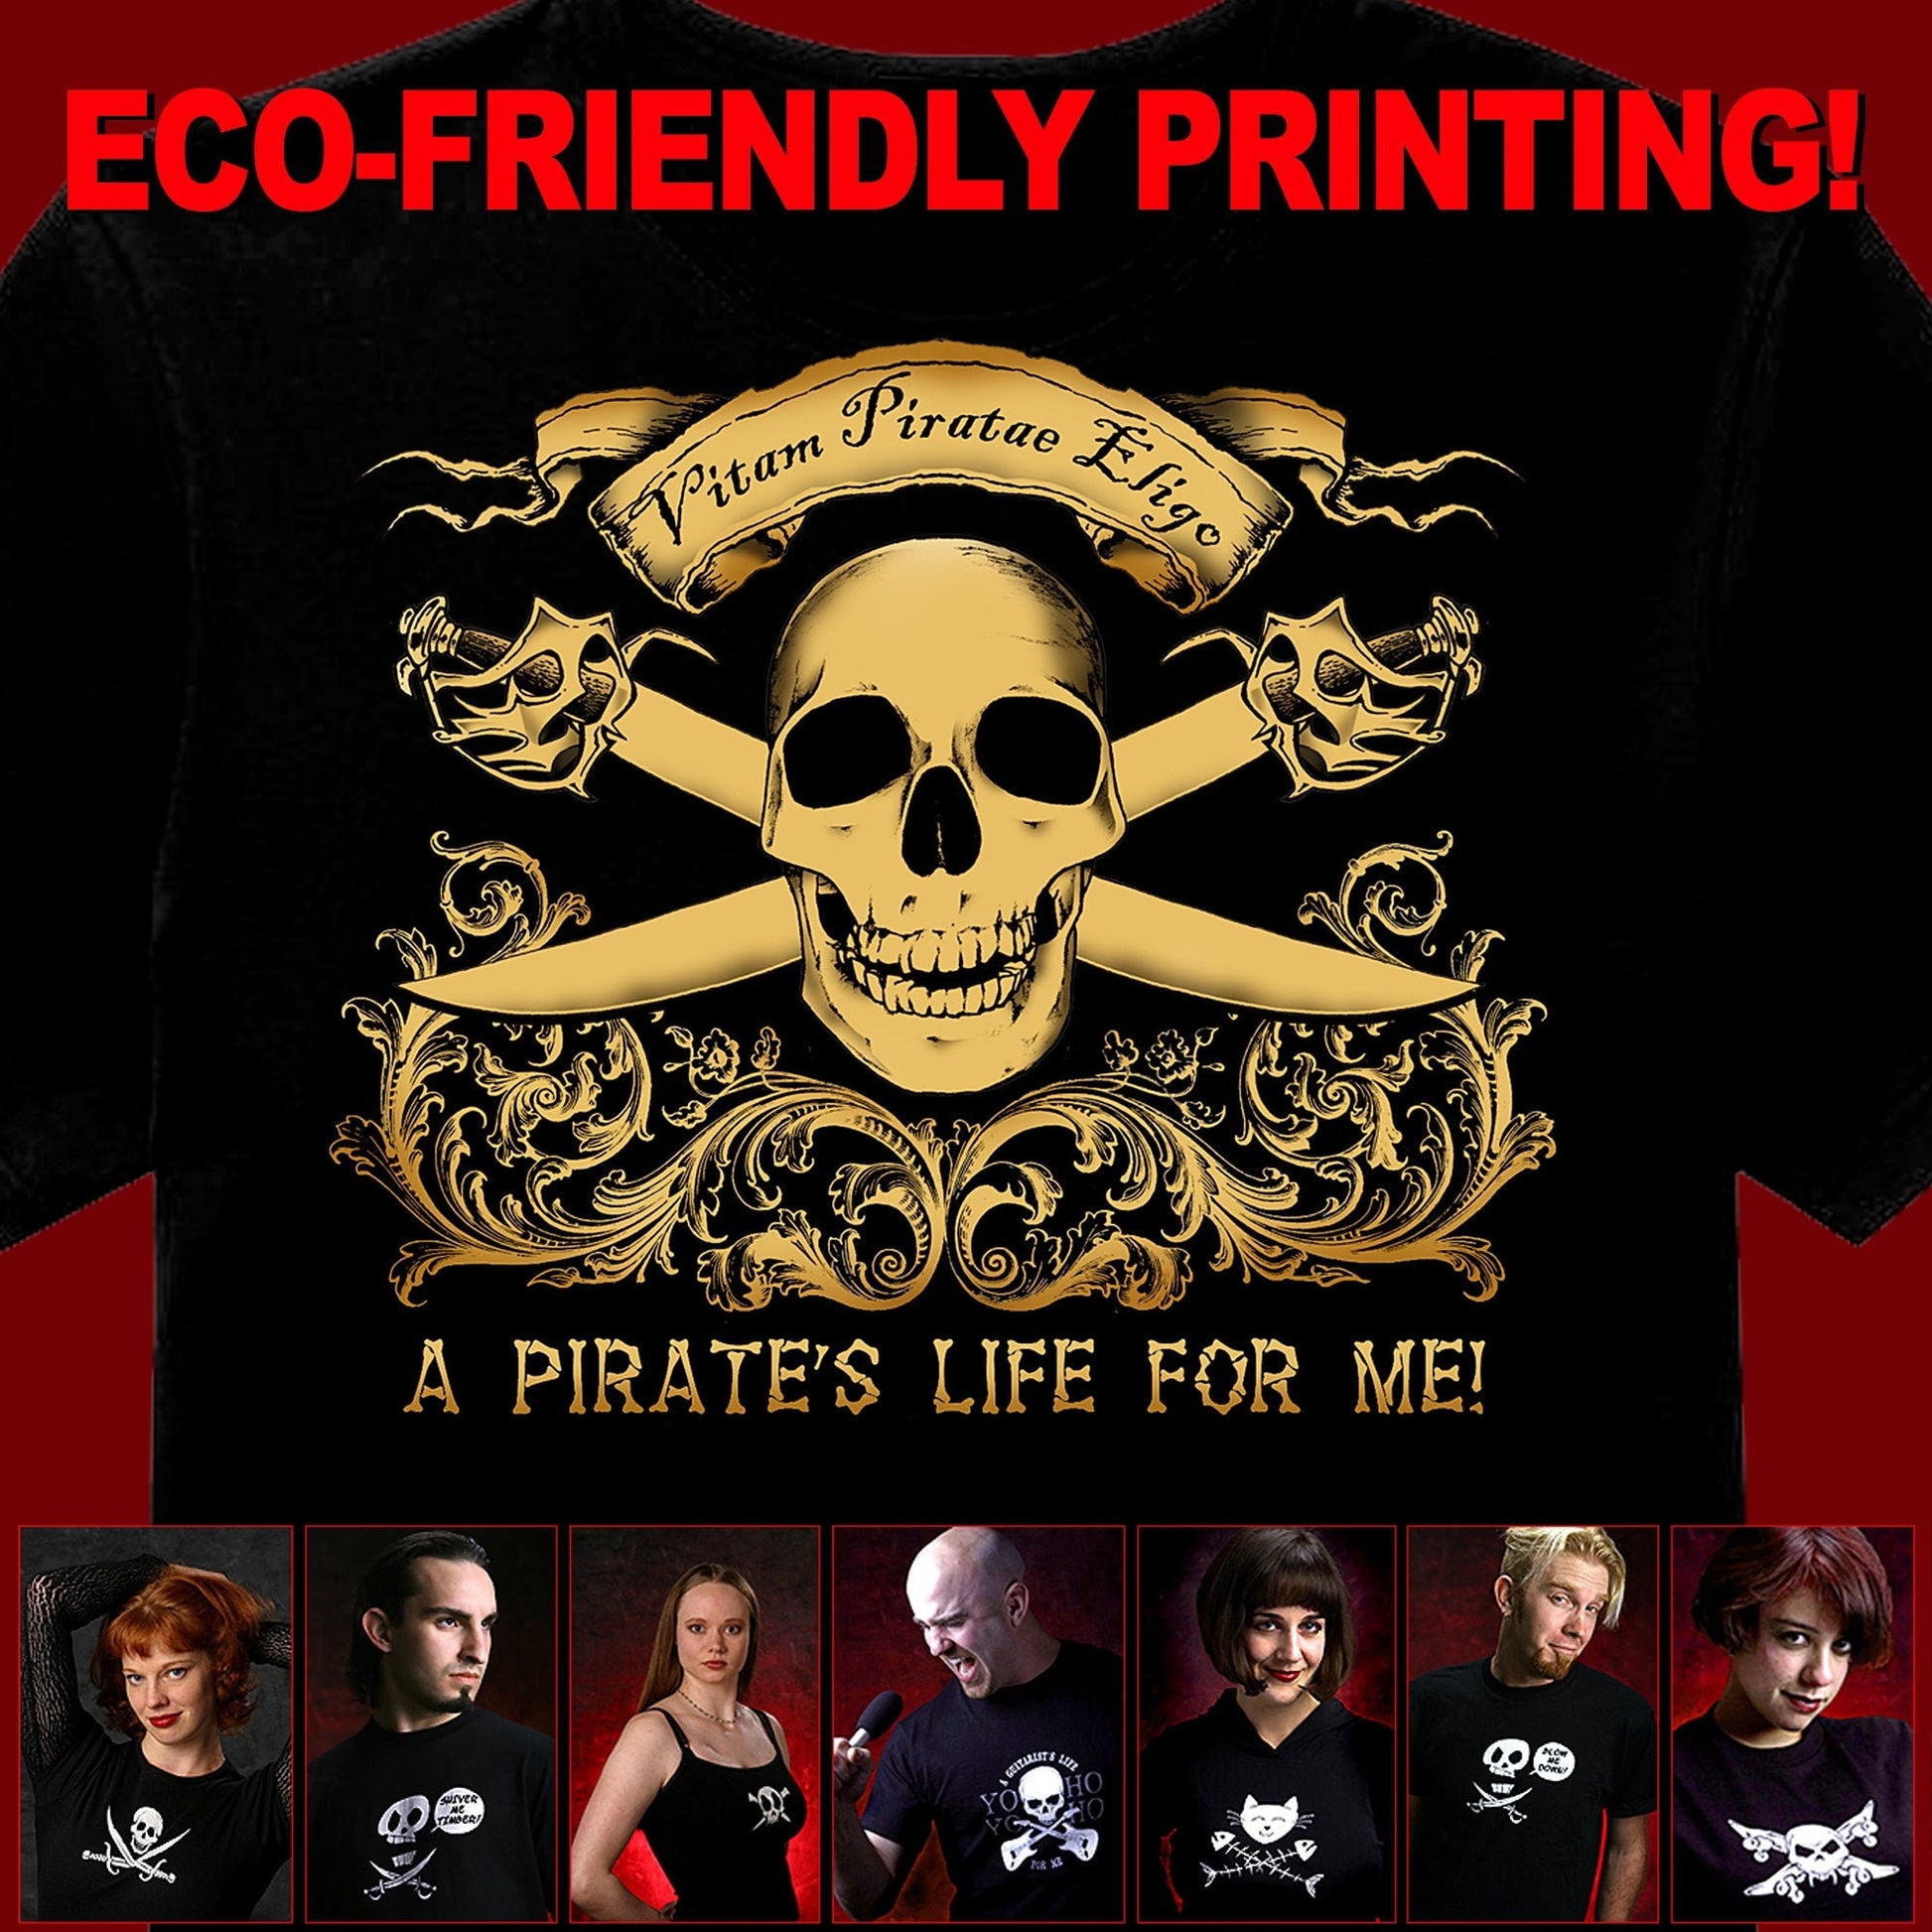 Pirate Shirt, Skull Shirt, Pirate T-shirt, Pirate Gift, Pirates Life For Me